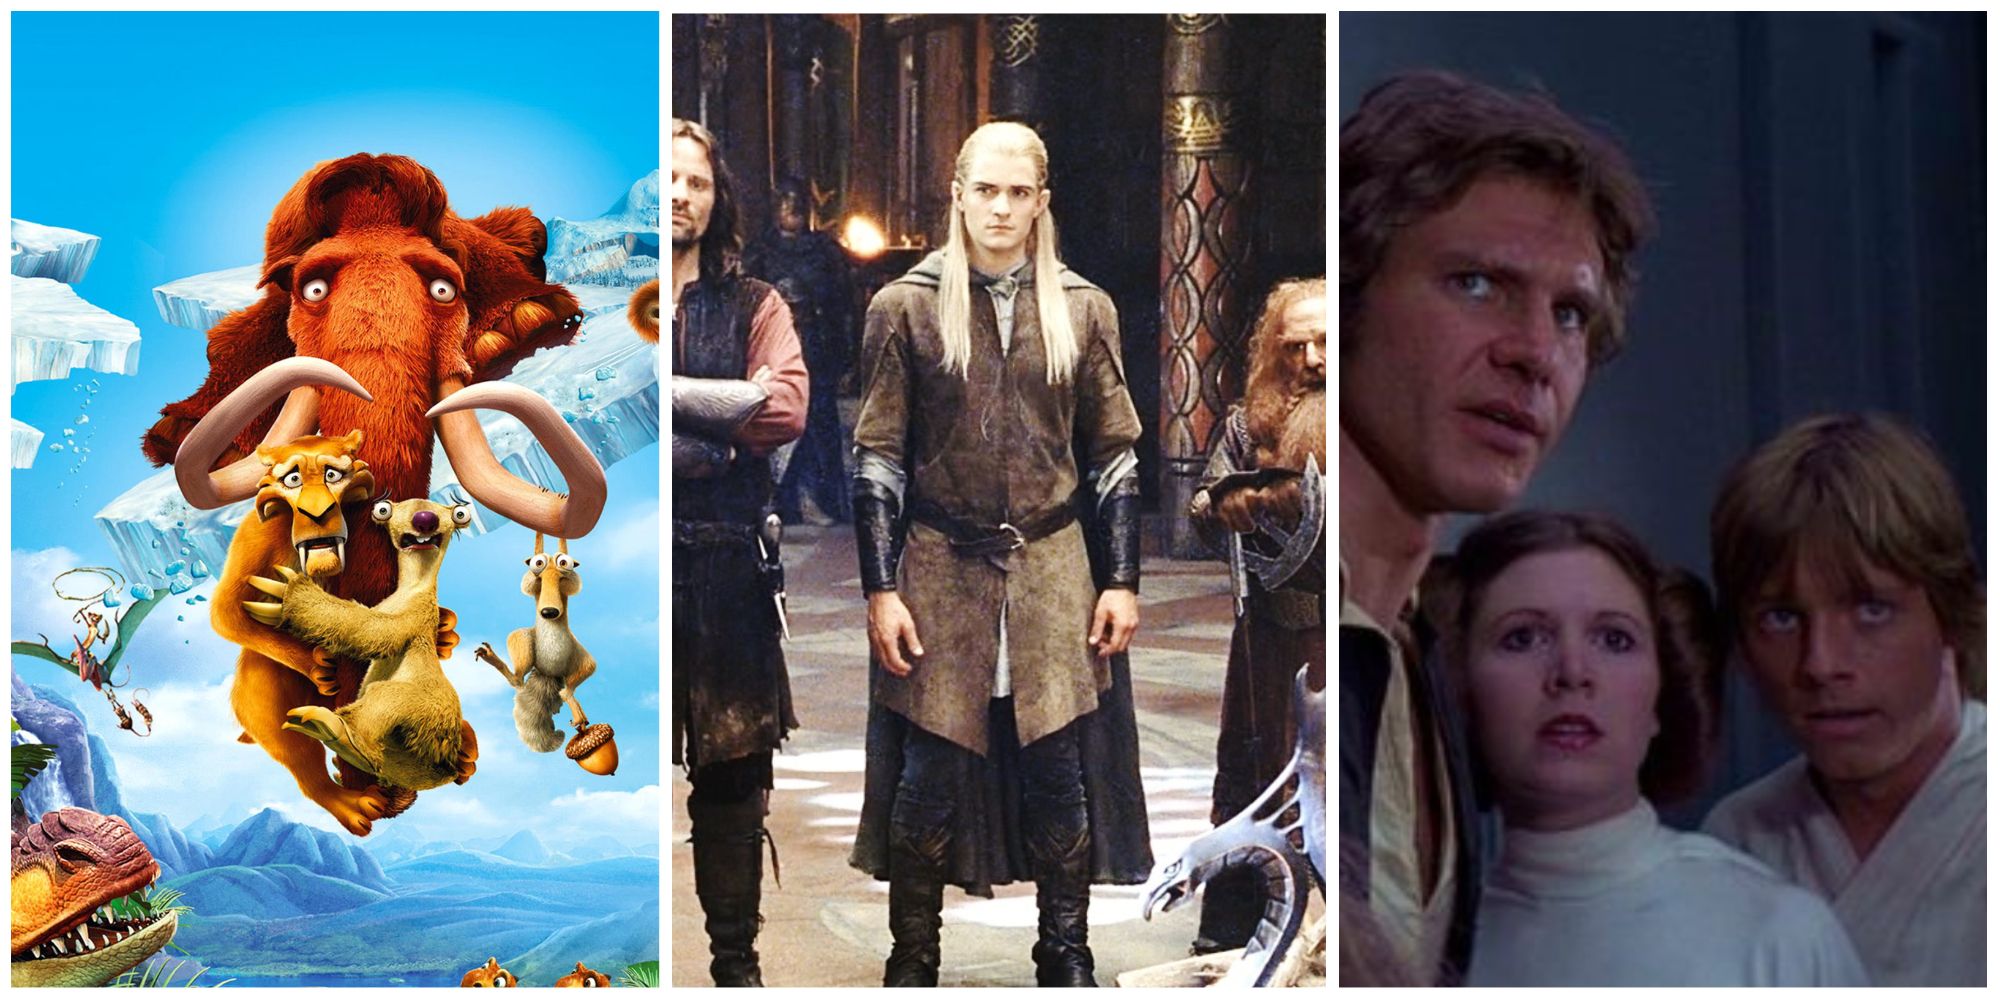 Best Trio Friendships Movies Ice Age Lord of the Rings Star Wars